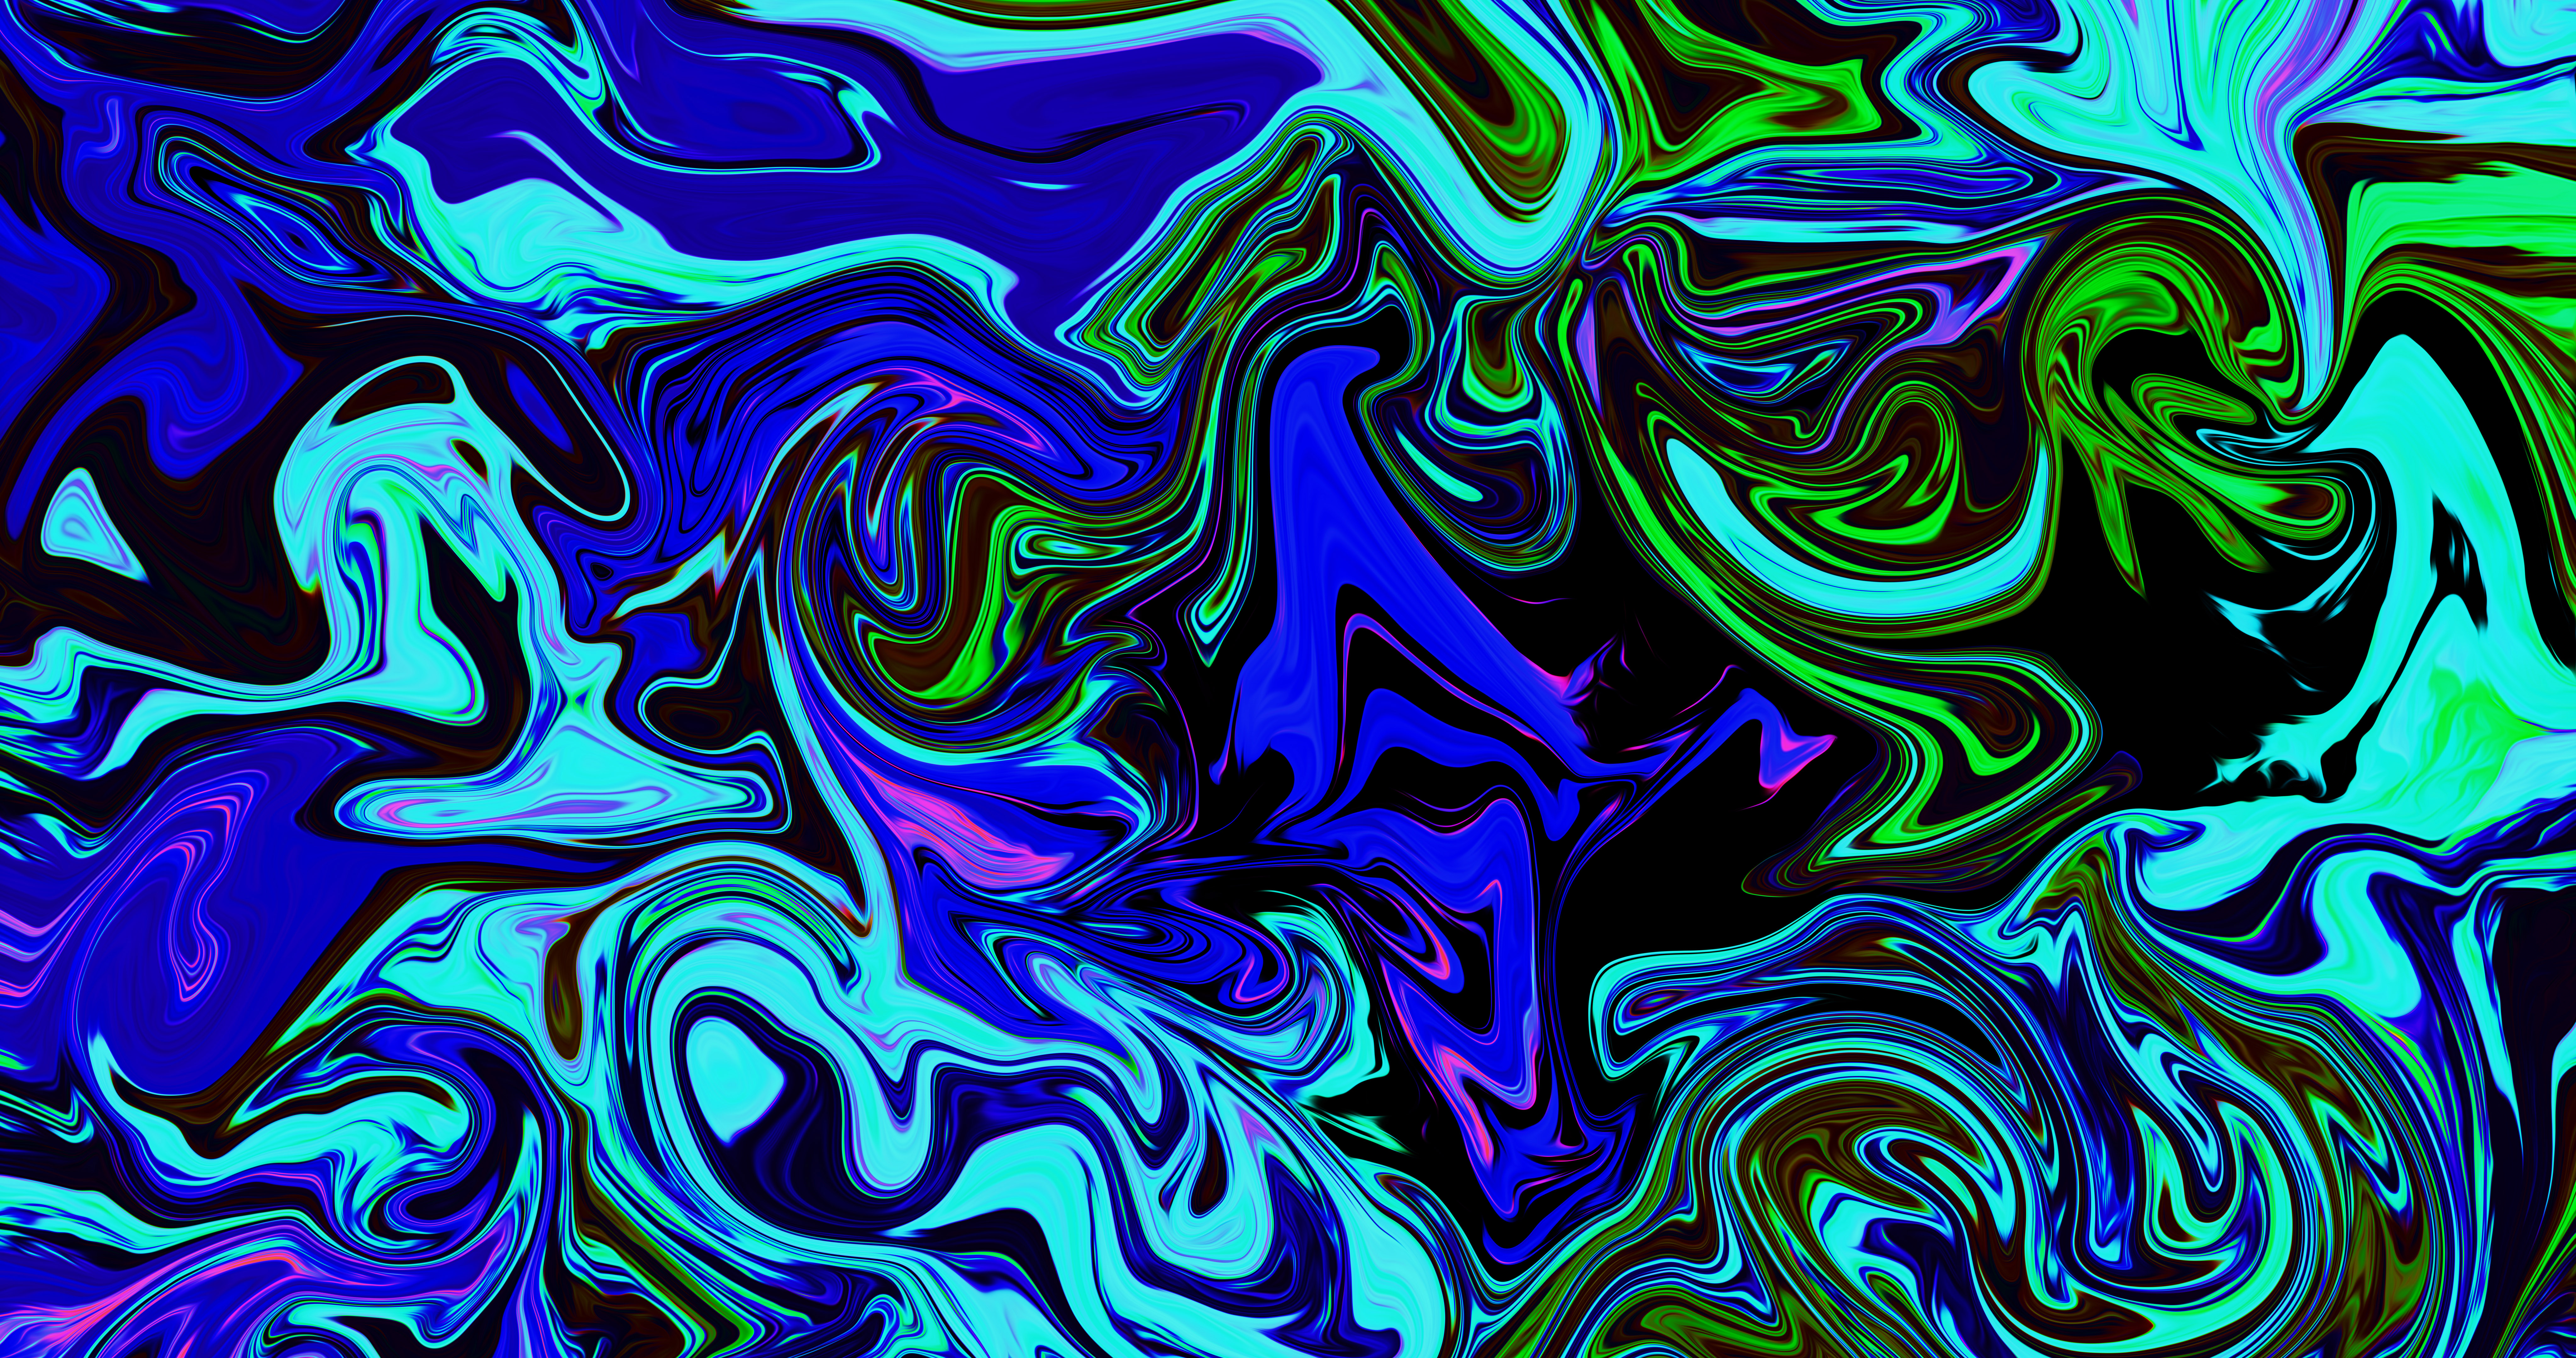 Abstract Liquid Fluid Interference Colorful Shapes Gradient Digital Art Artwork 8k Resolution Screen 8192x4320